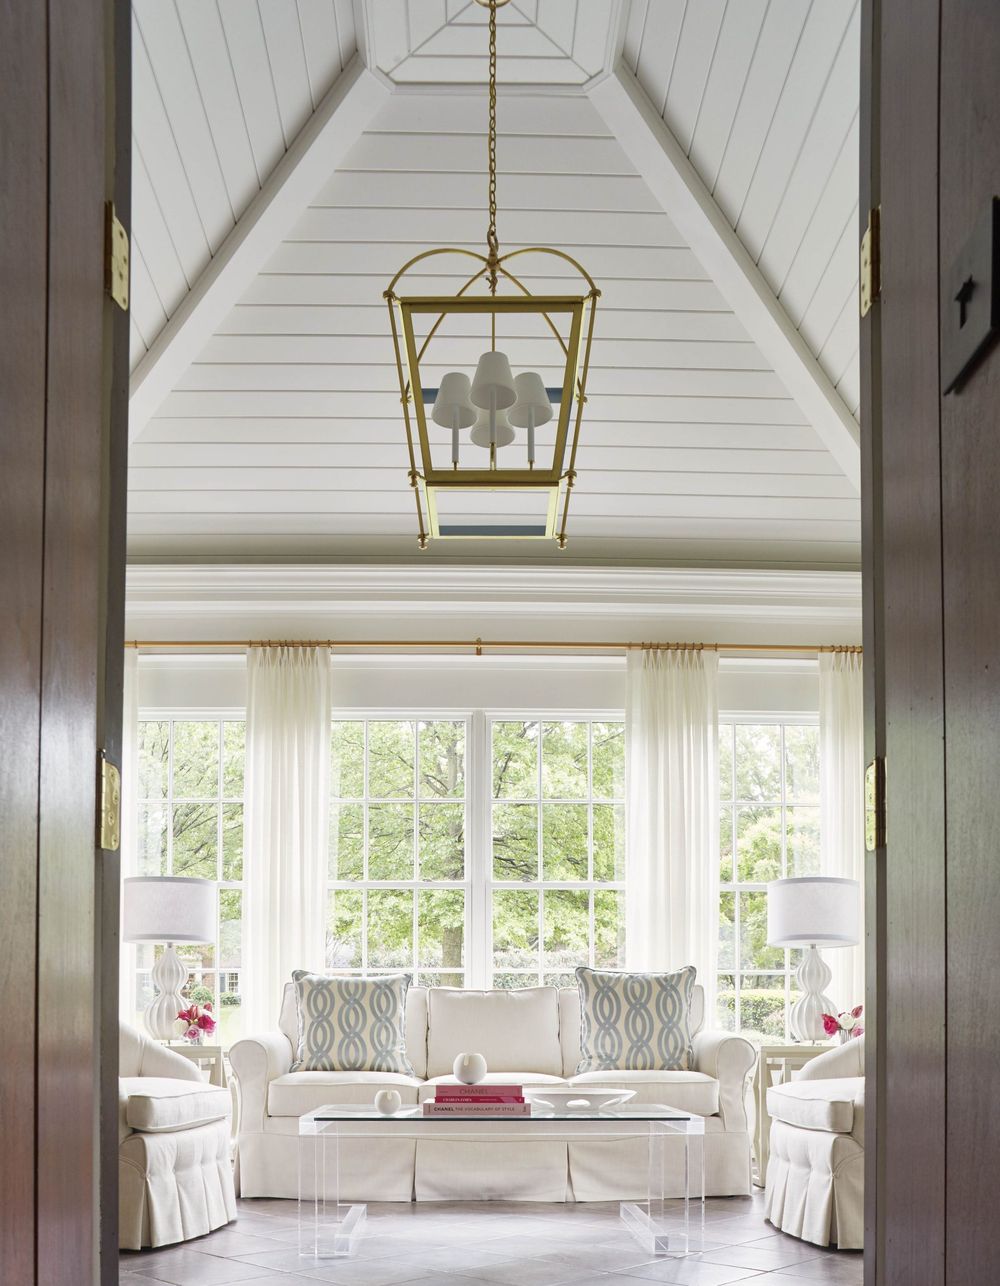 Ceiling ideas Vaulted Shiplap suellengregory